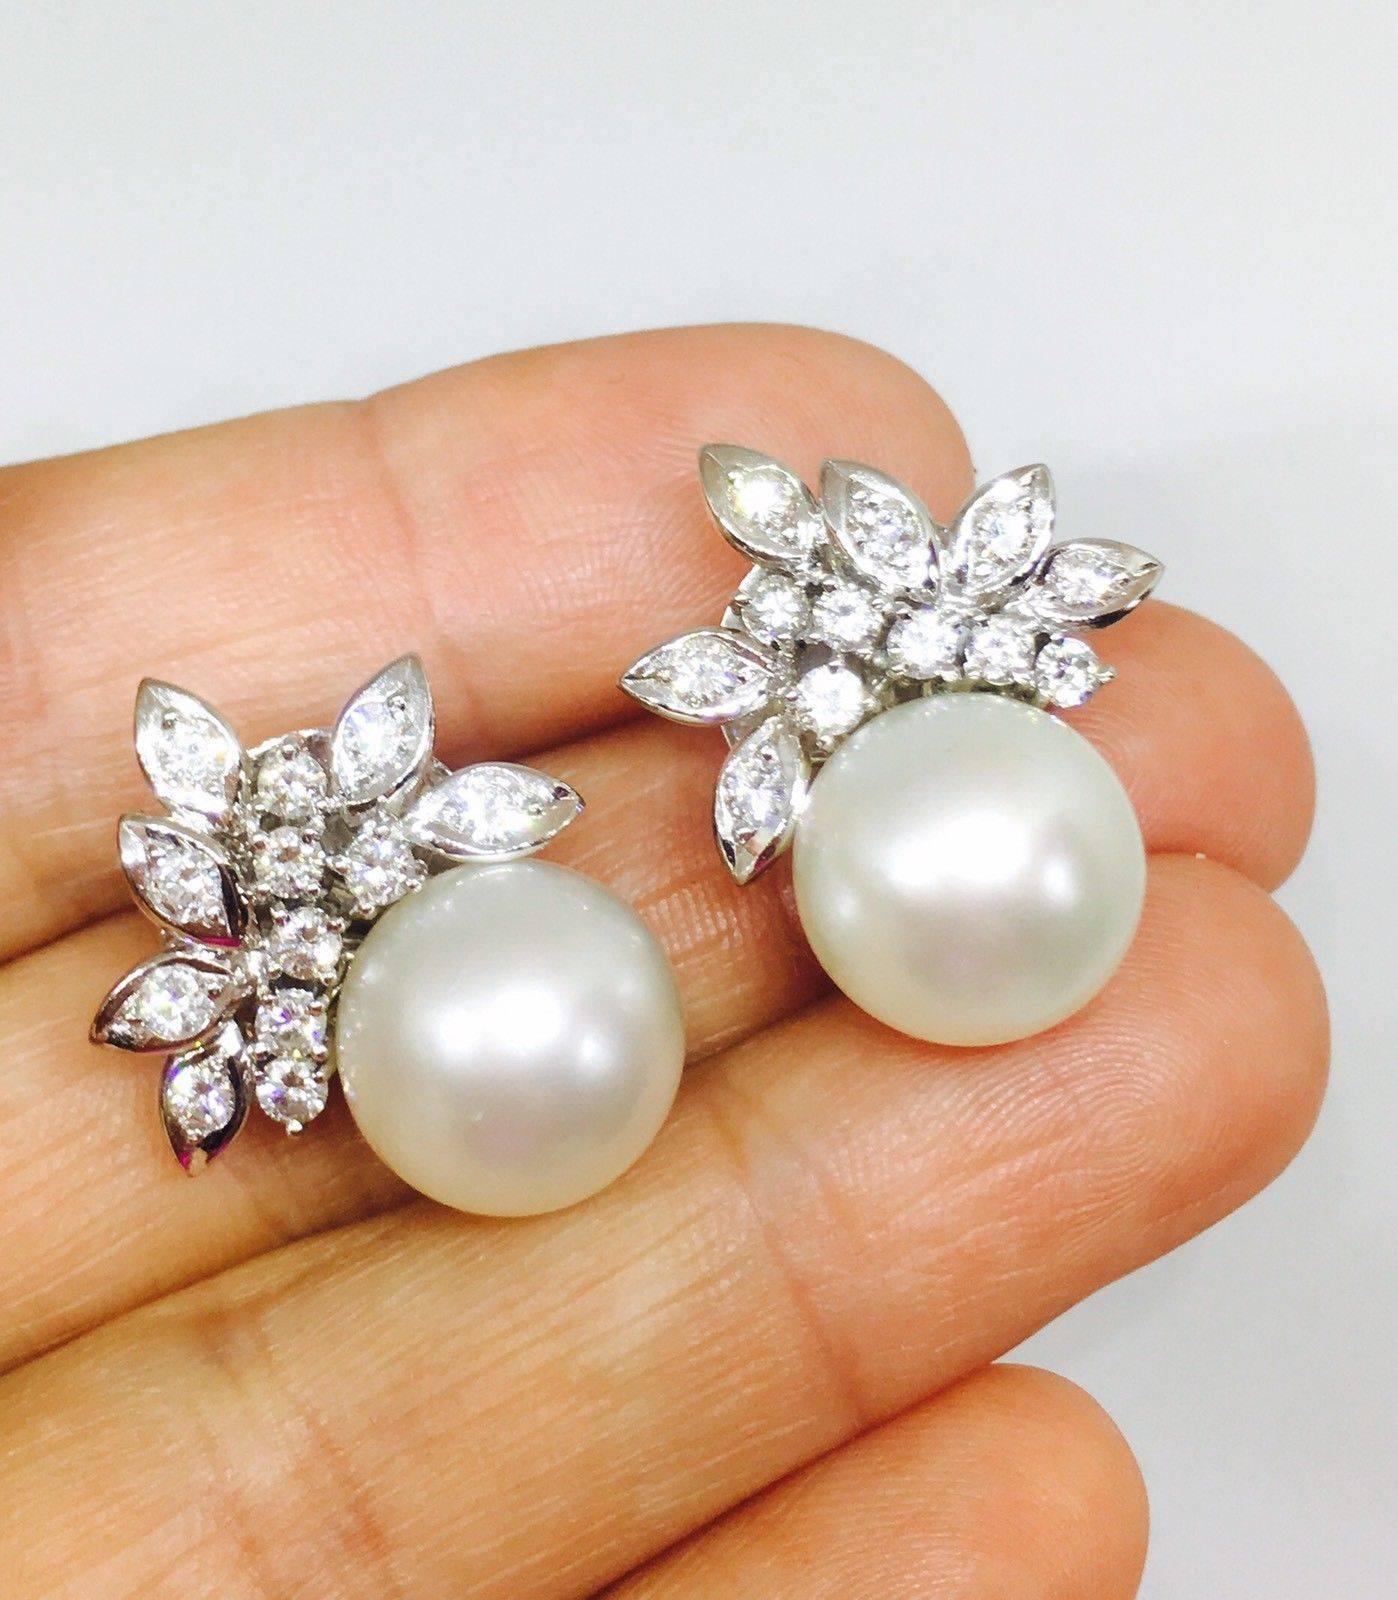 Stunning 14k Gold Estate 13.2mm South Sea Pearl, 1.50 Carats Brilliant GH/VS Diamond Earrings

Beautiful 14k gold South Seas pearl and diamond cluster earrings sit perfectly on the ear, for the optimum sparkle and shine.  They are very active, fiery